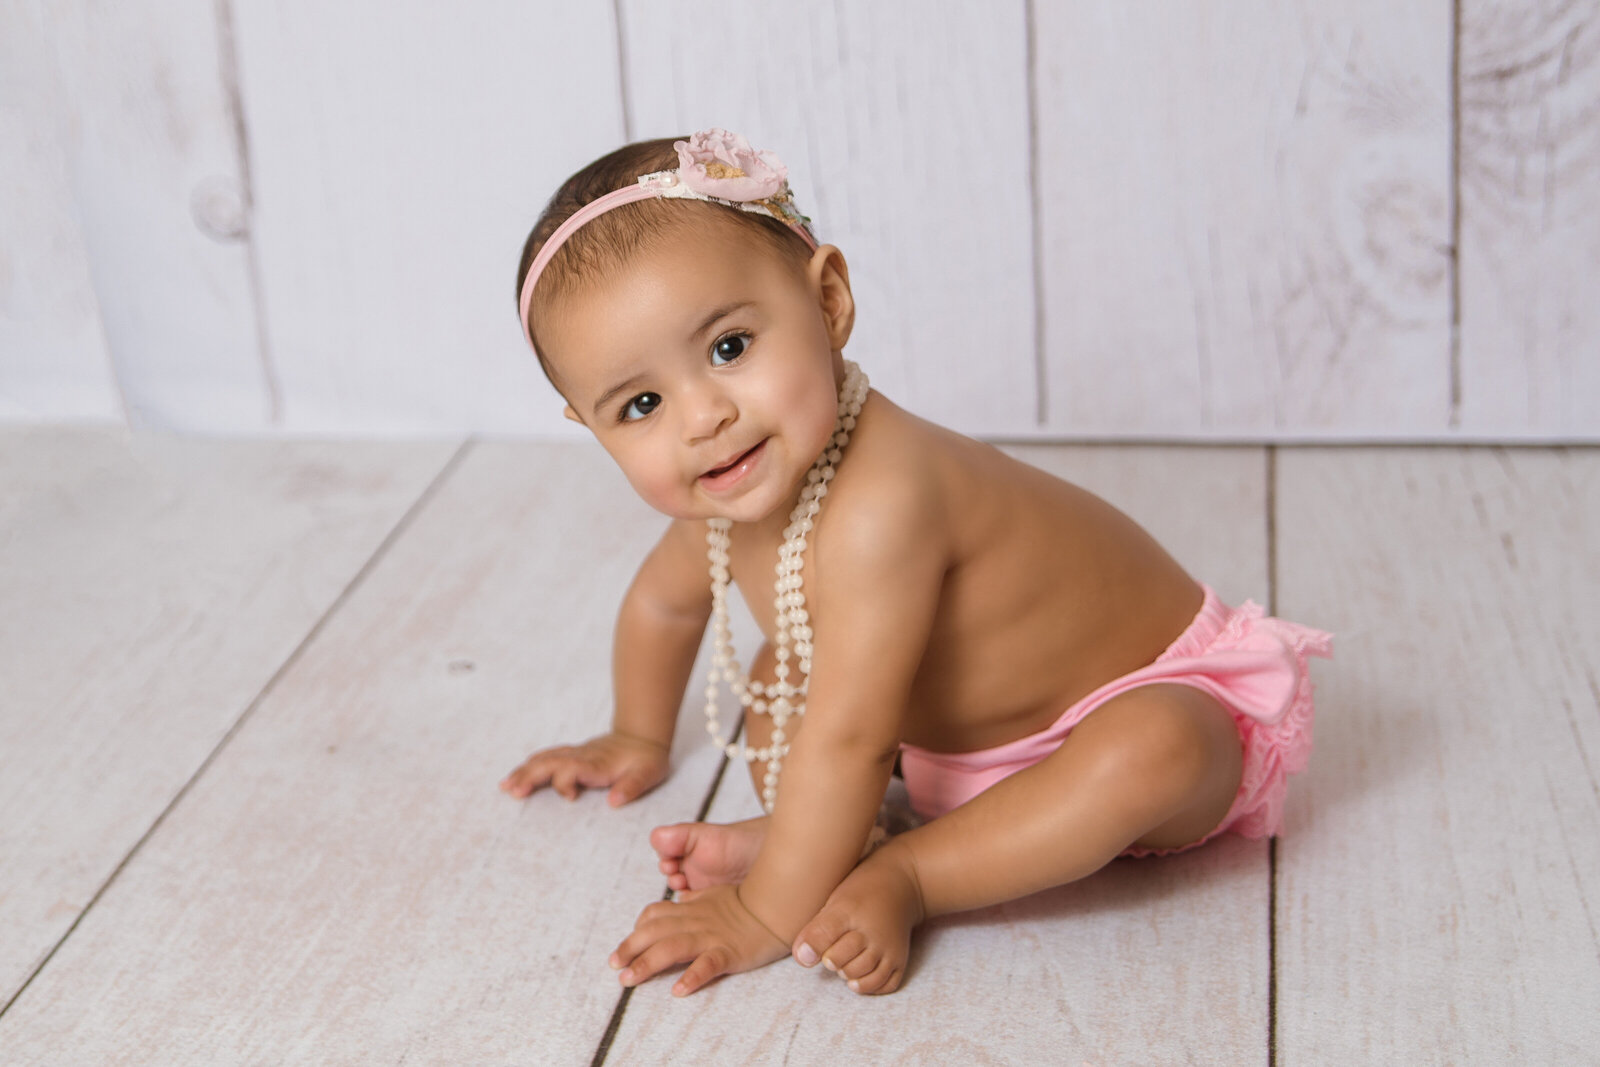 Milestone Photographer, a baby wears a necklace of pearls and sits up on wooden floors